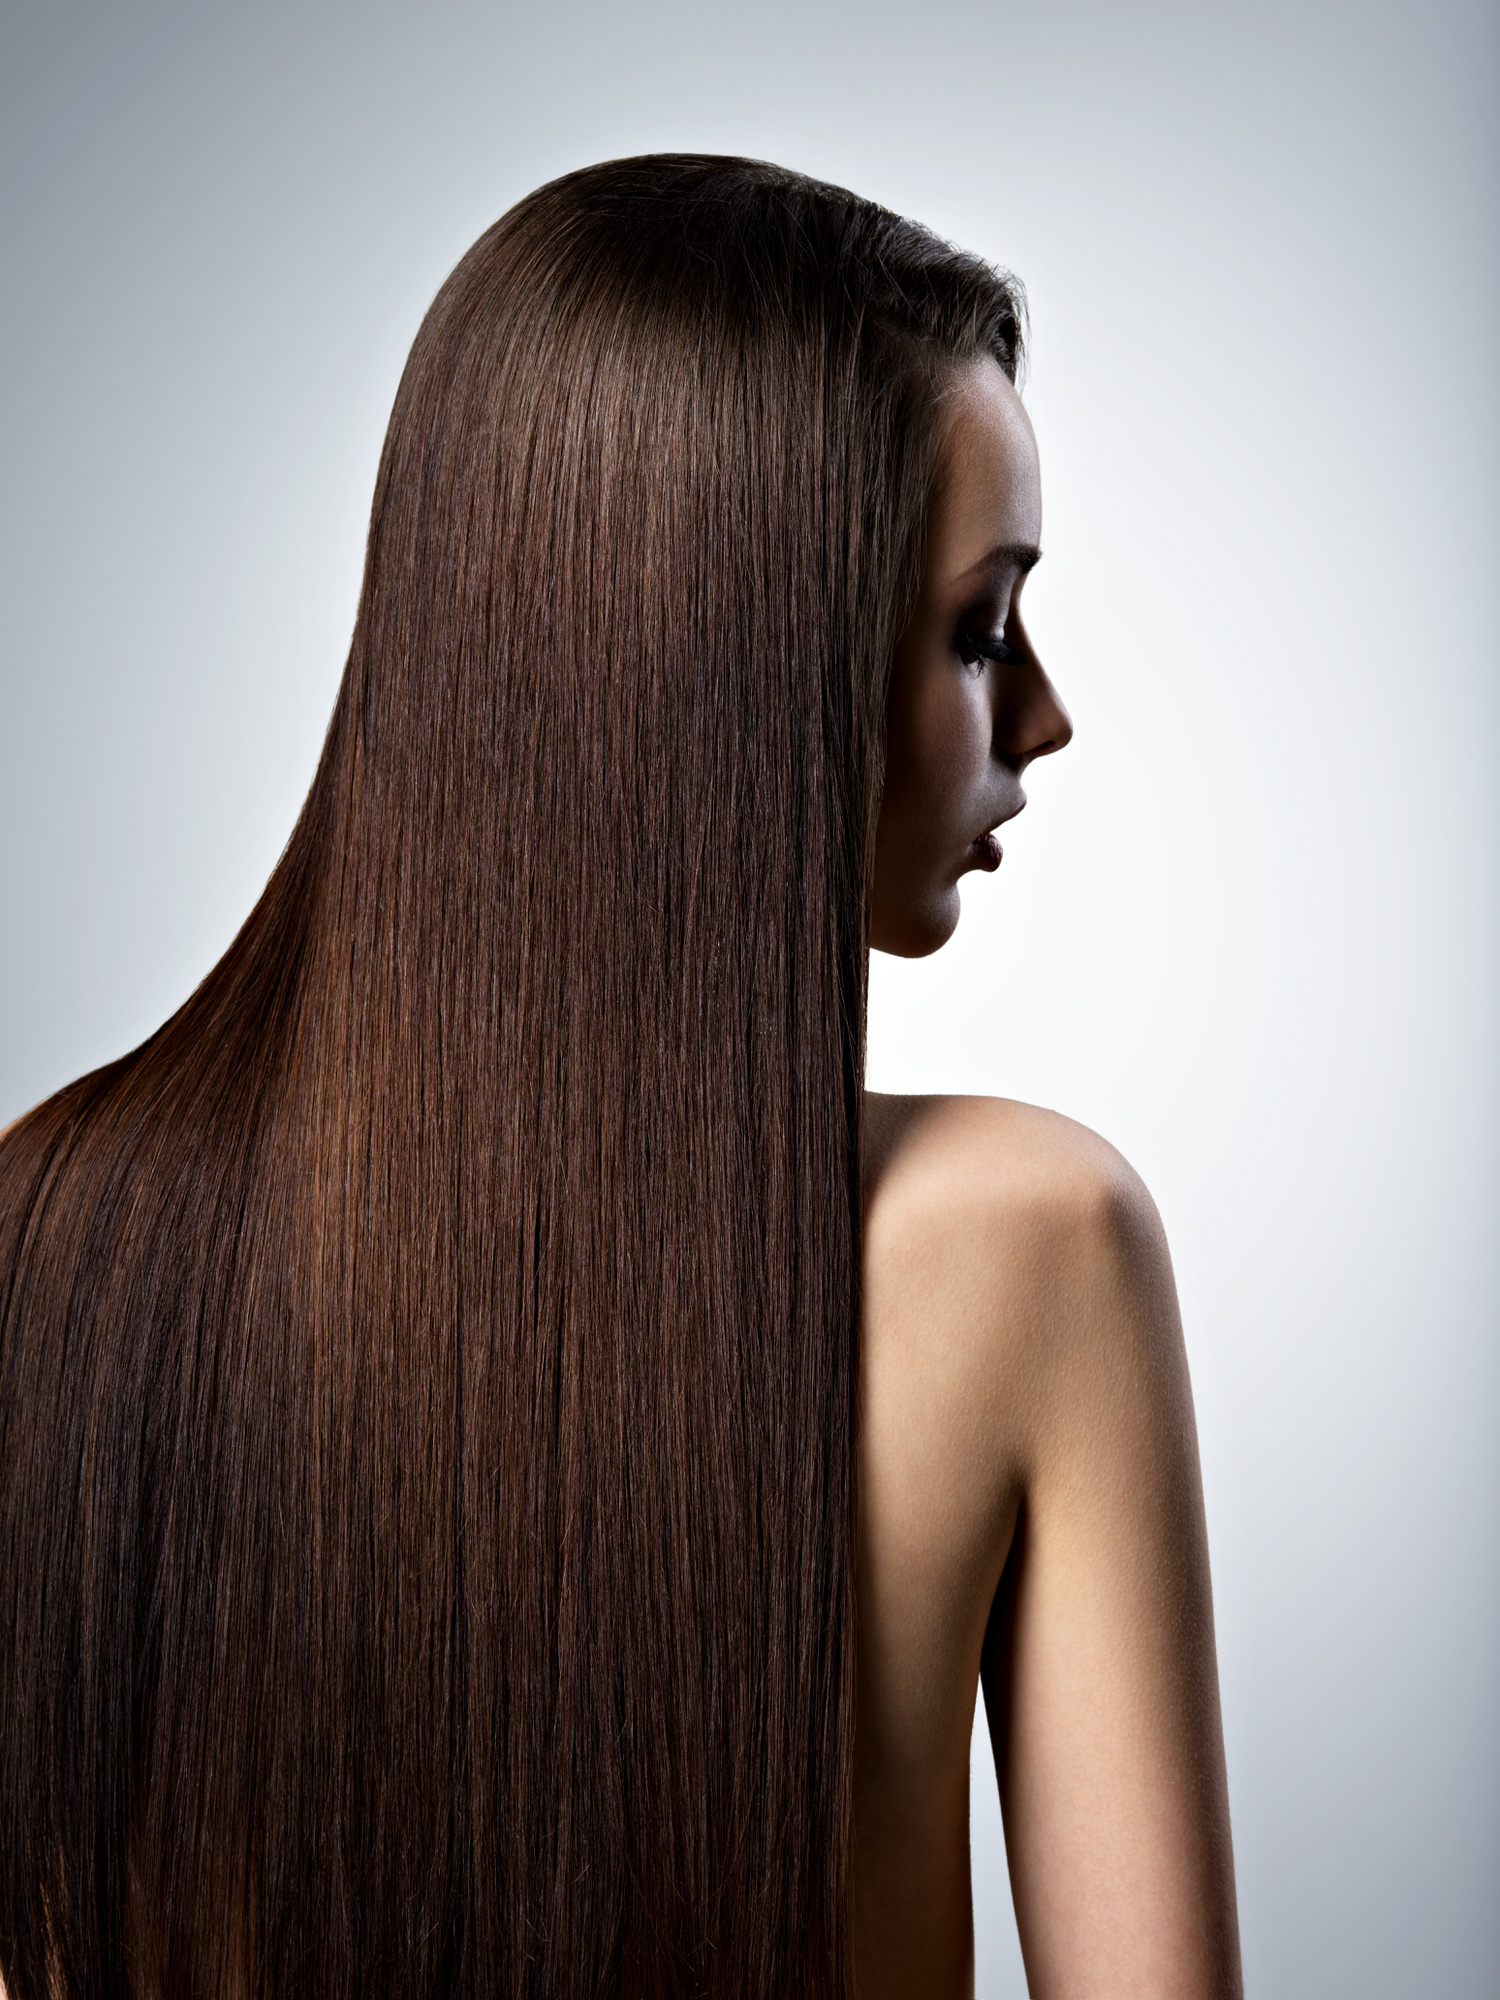 portrait-beautiful-woman-with-long-straight-brown-hair-studio